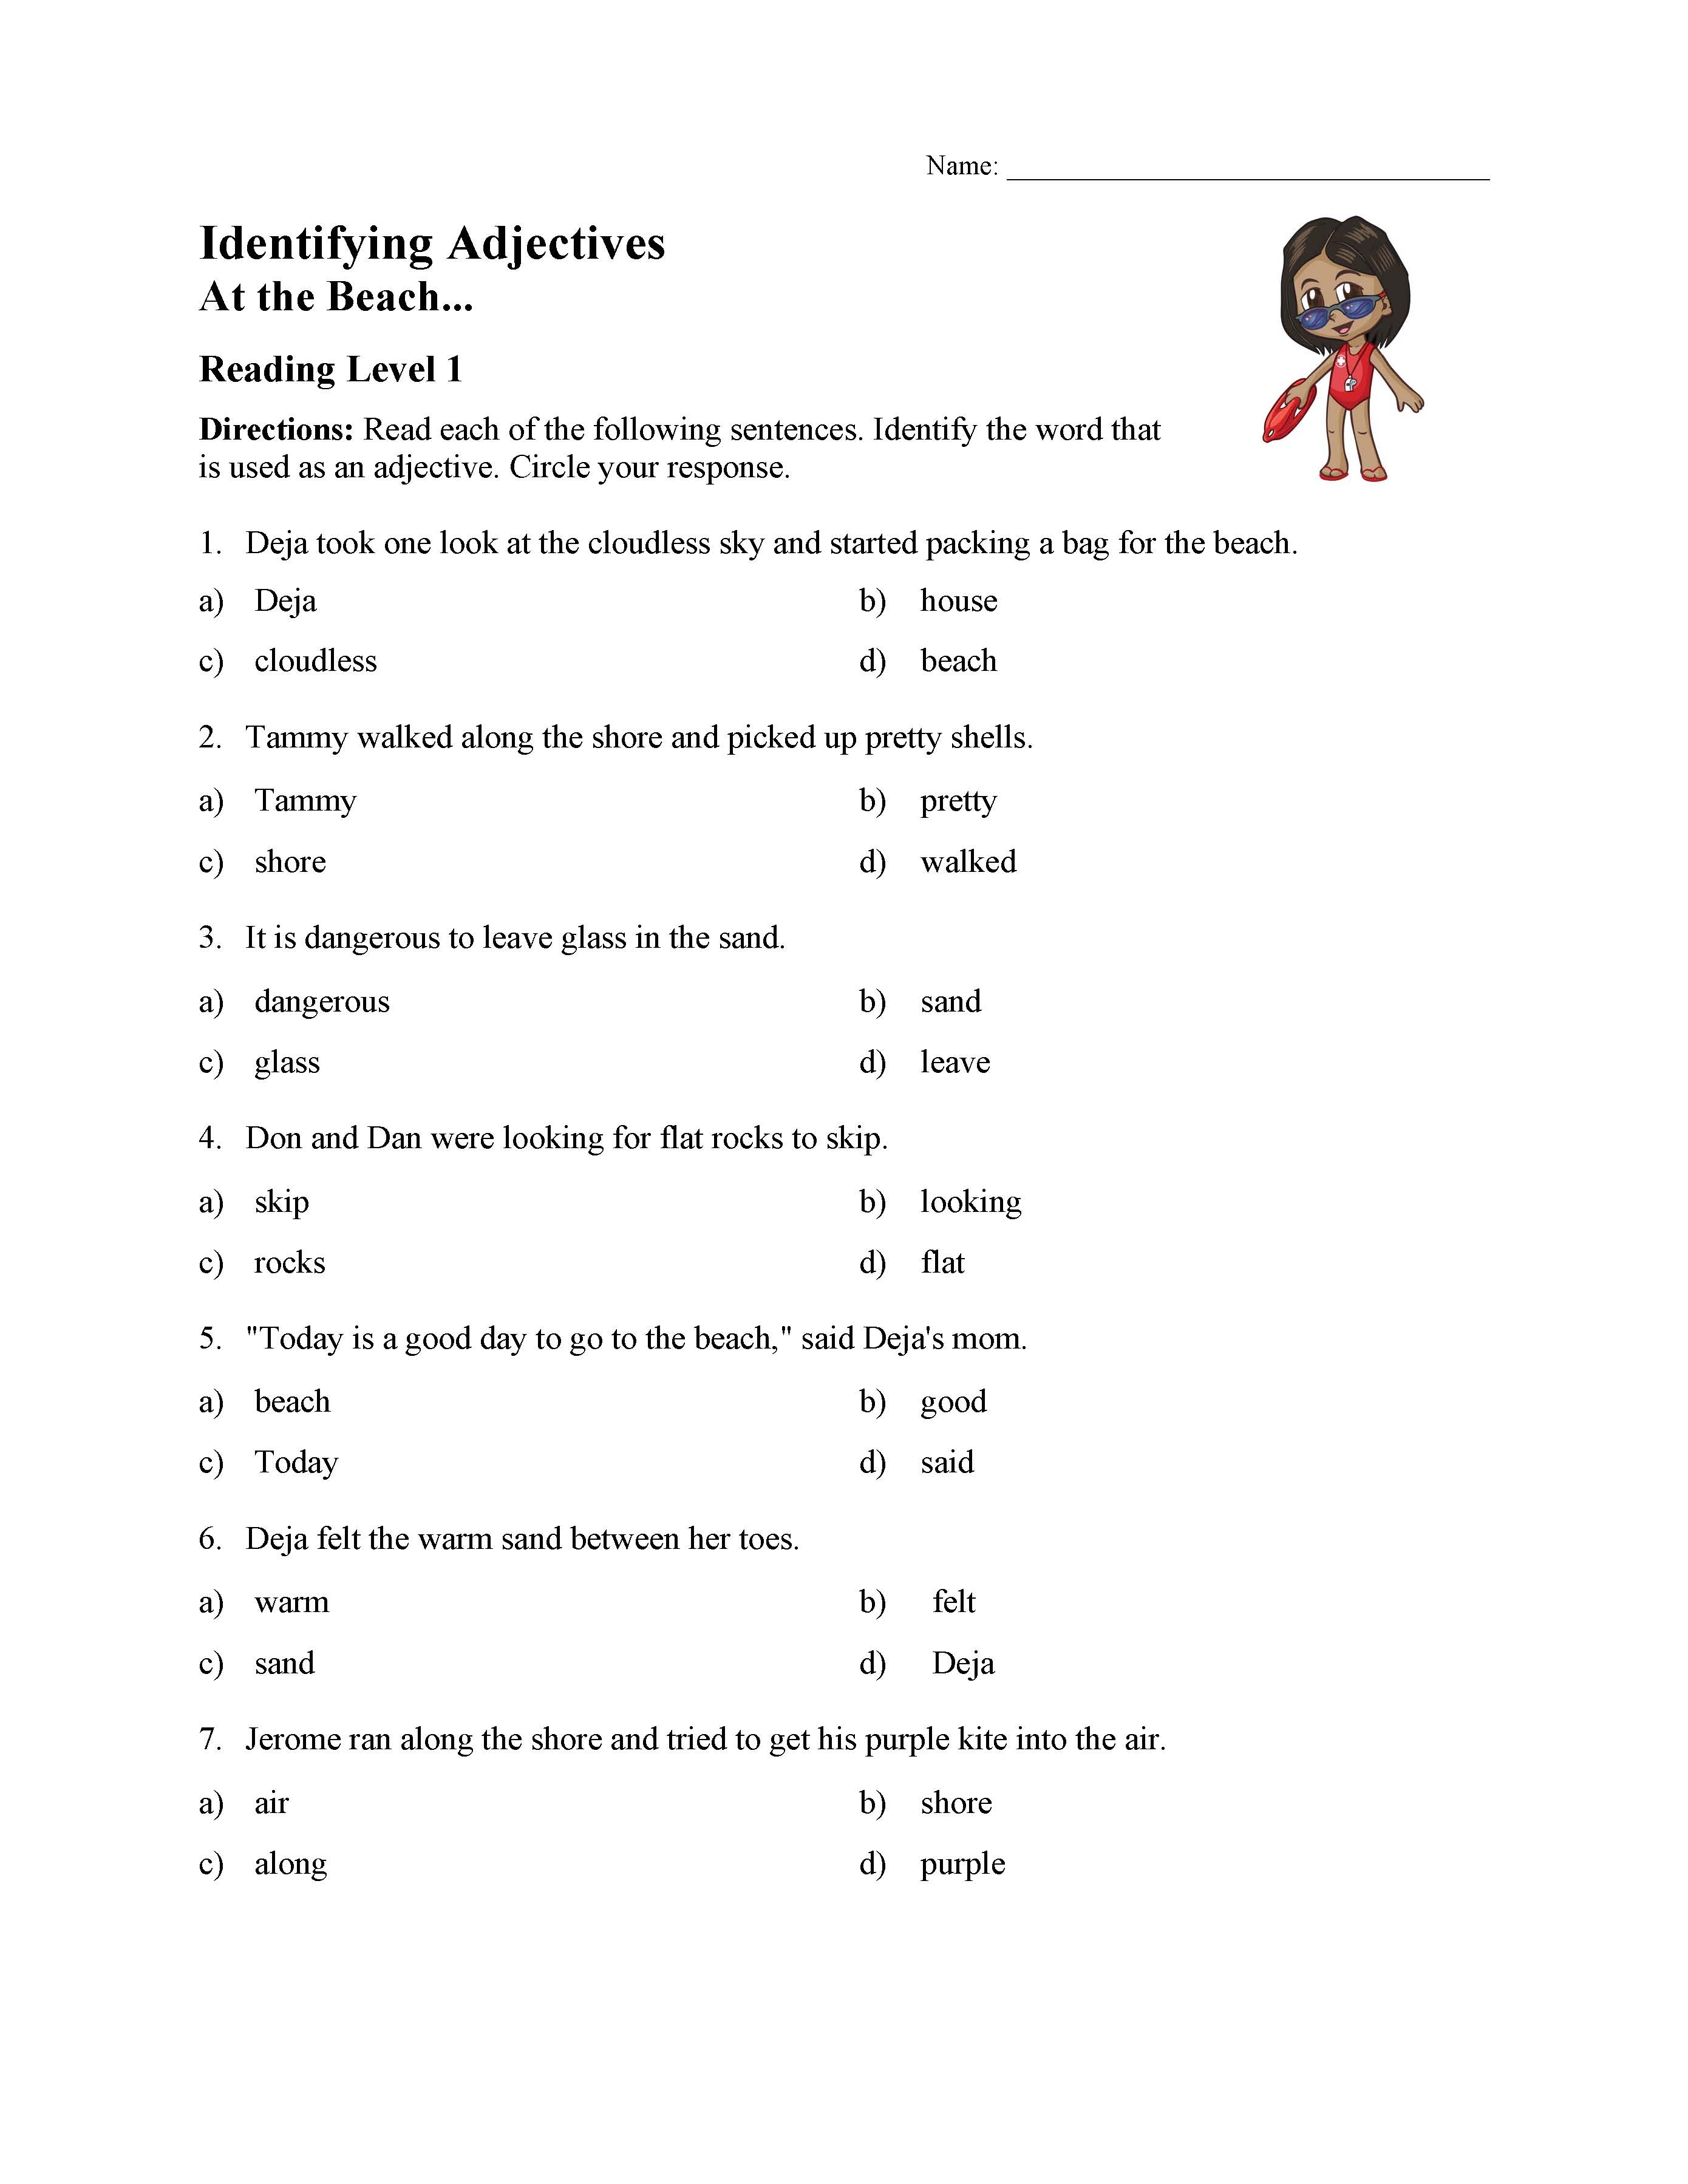 adjectives-worksheets-for-grade-5-with-answers-pdf-worksheet-resume